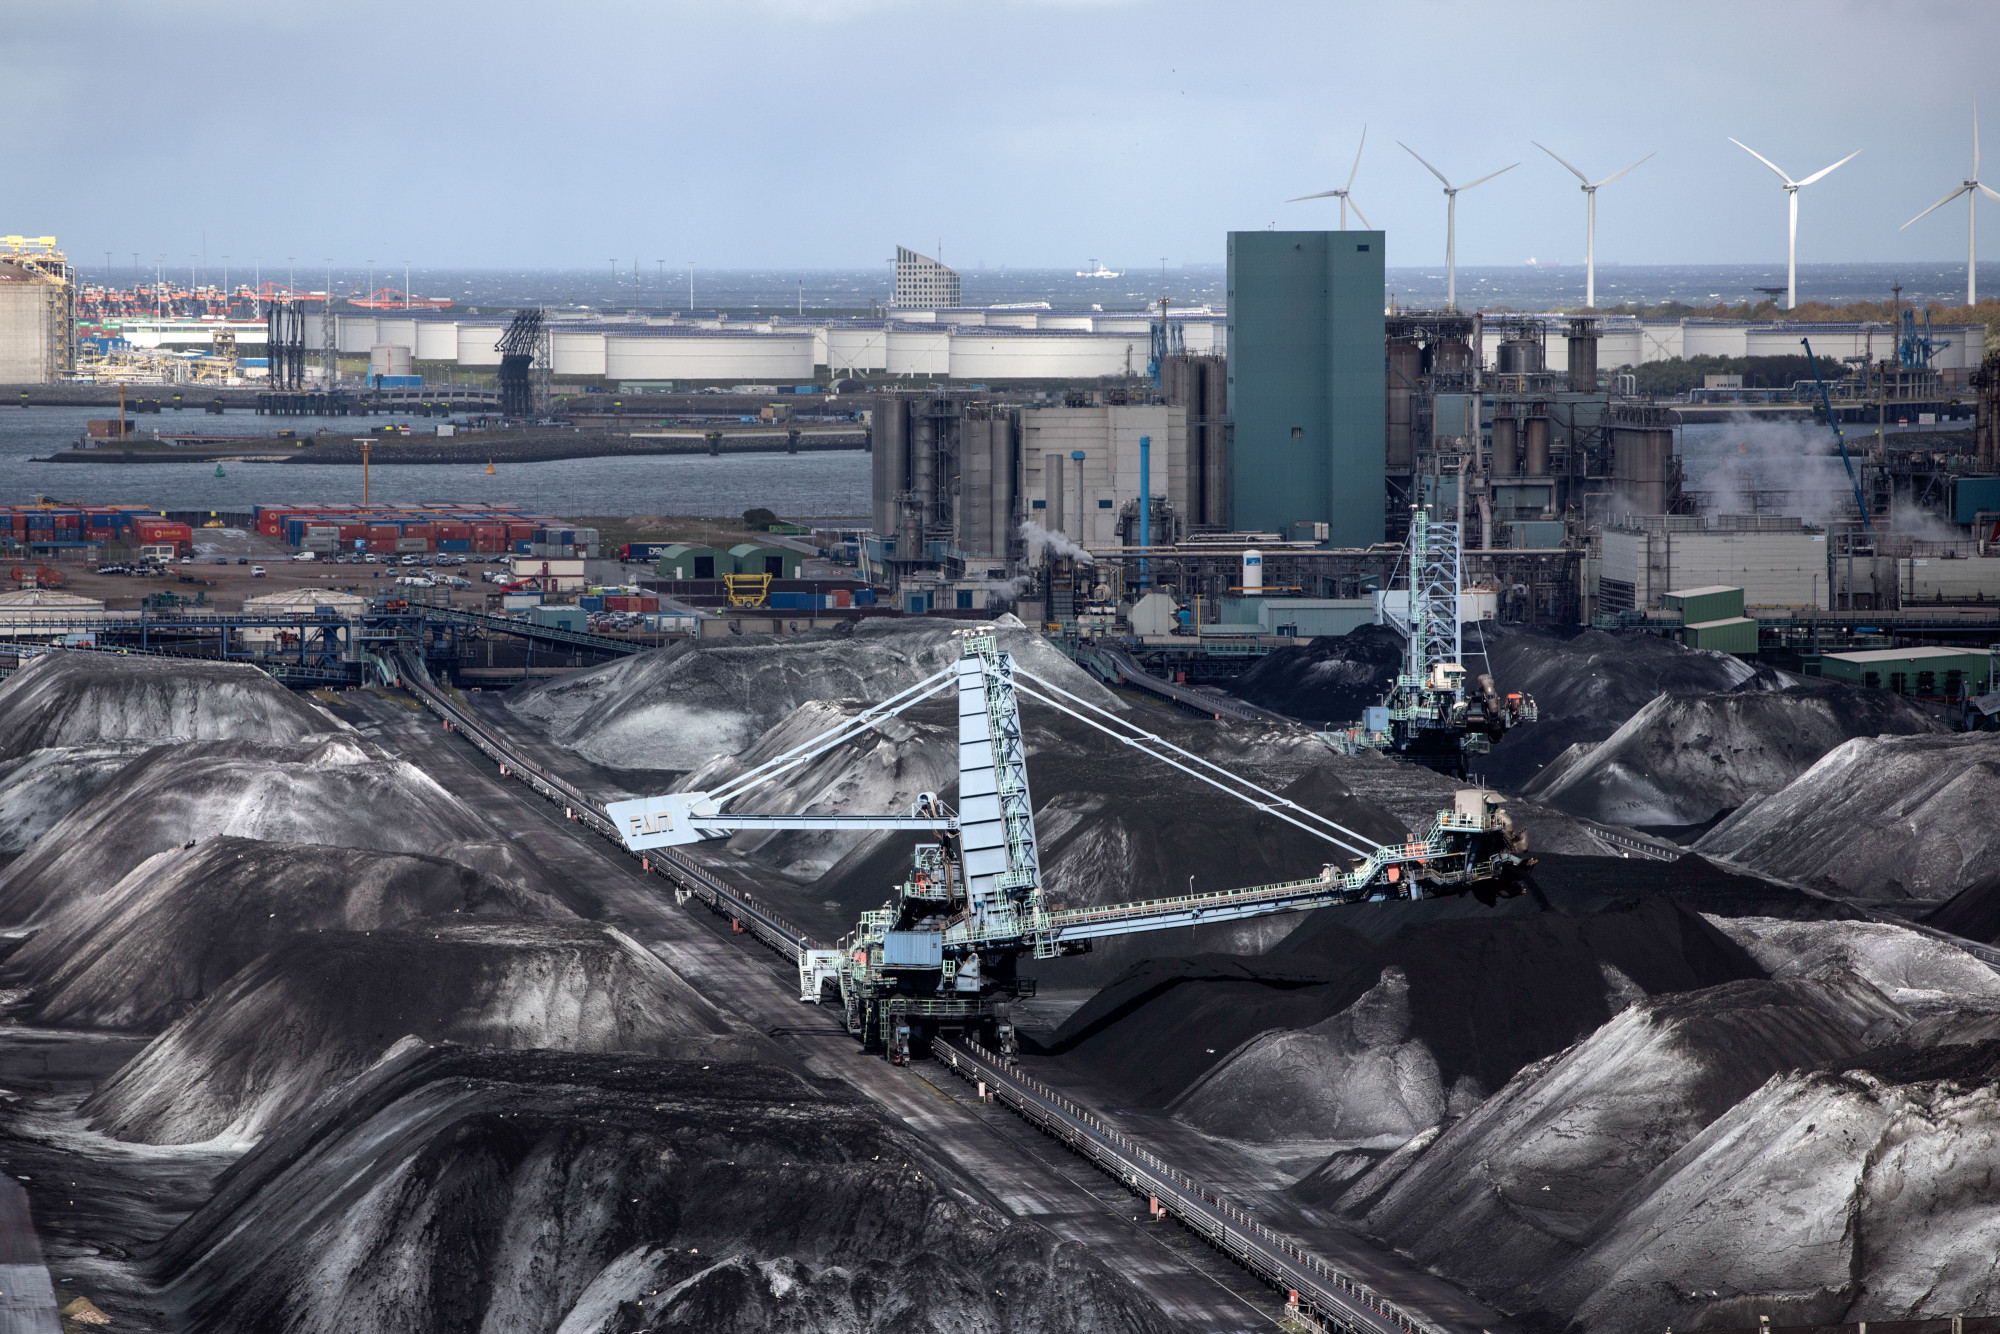 Vehicles operate at a coal storage facility at the Port of Rotterdam.